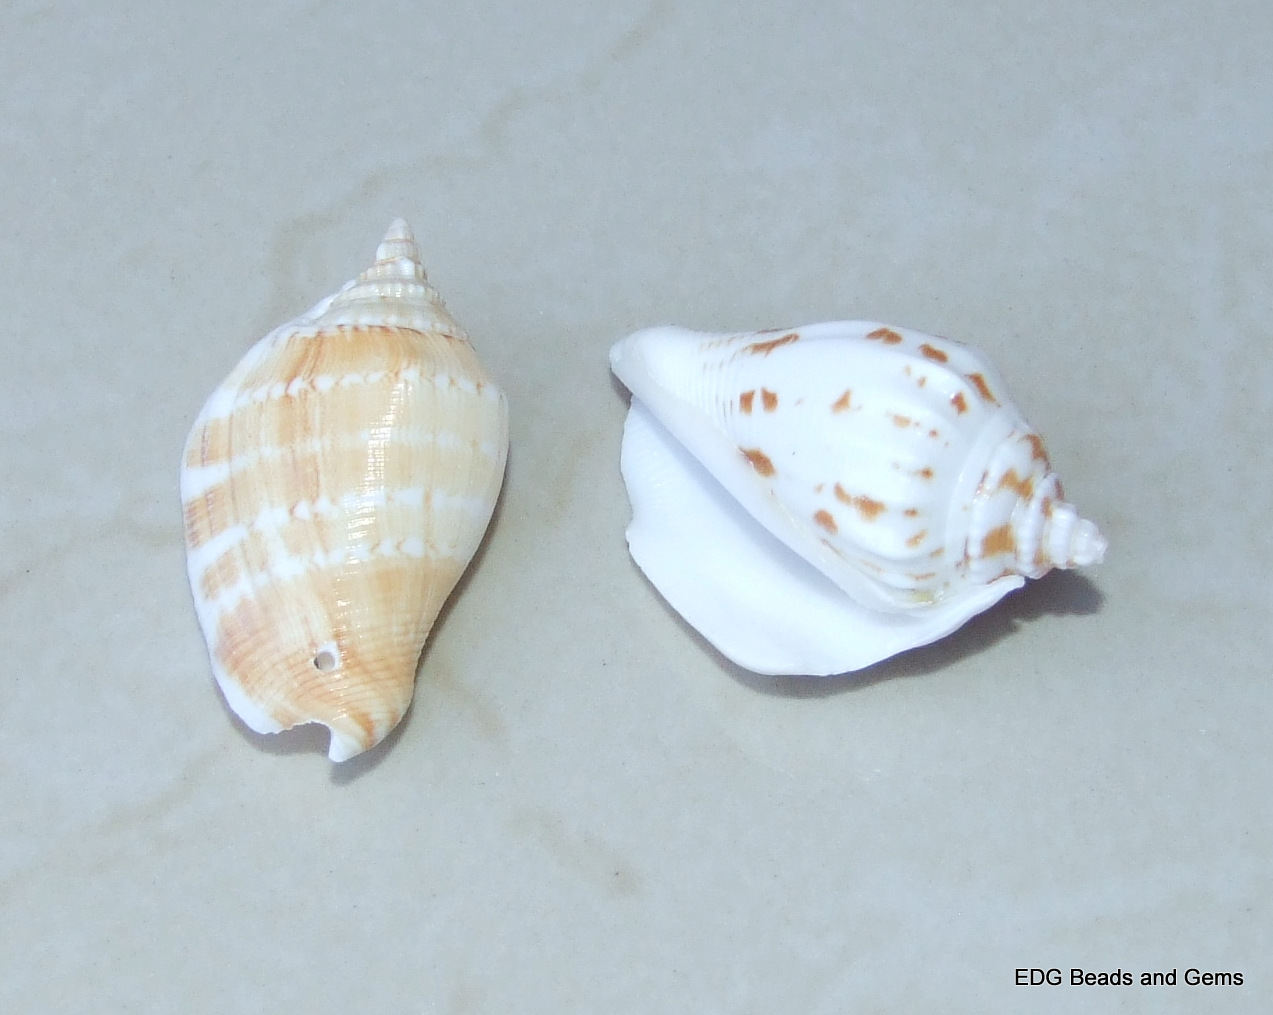 4 Large Natural Conch Sea Shell, Spiral Shell Bead, Seashell, Shell Bead, Beach Decor, Ocean Shell, Beach Jewelry, 40mm - 45mm - 007-57